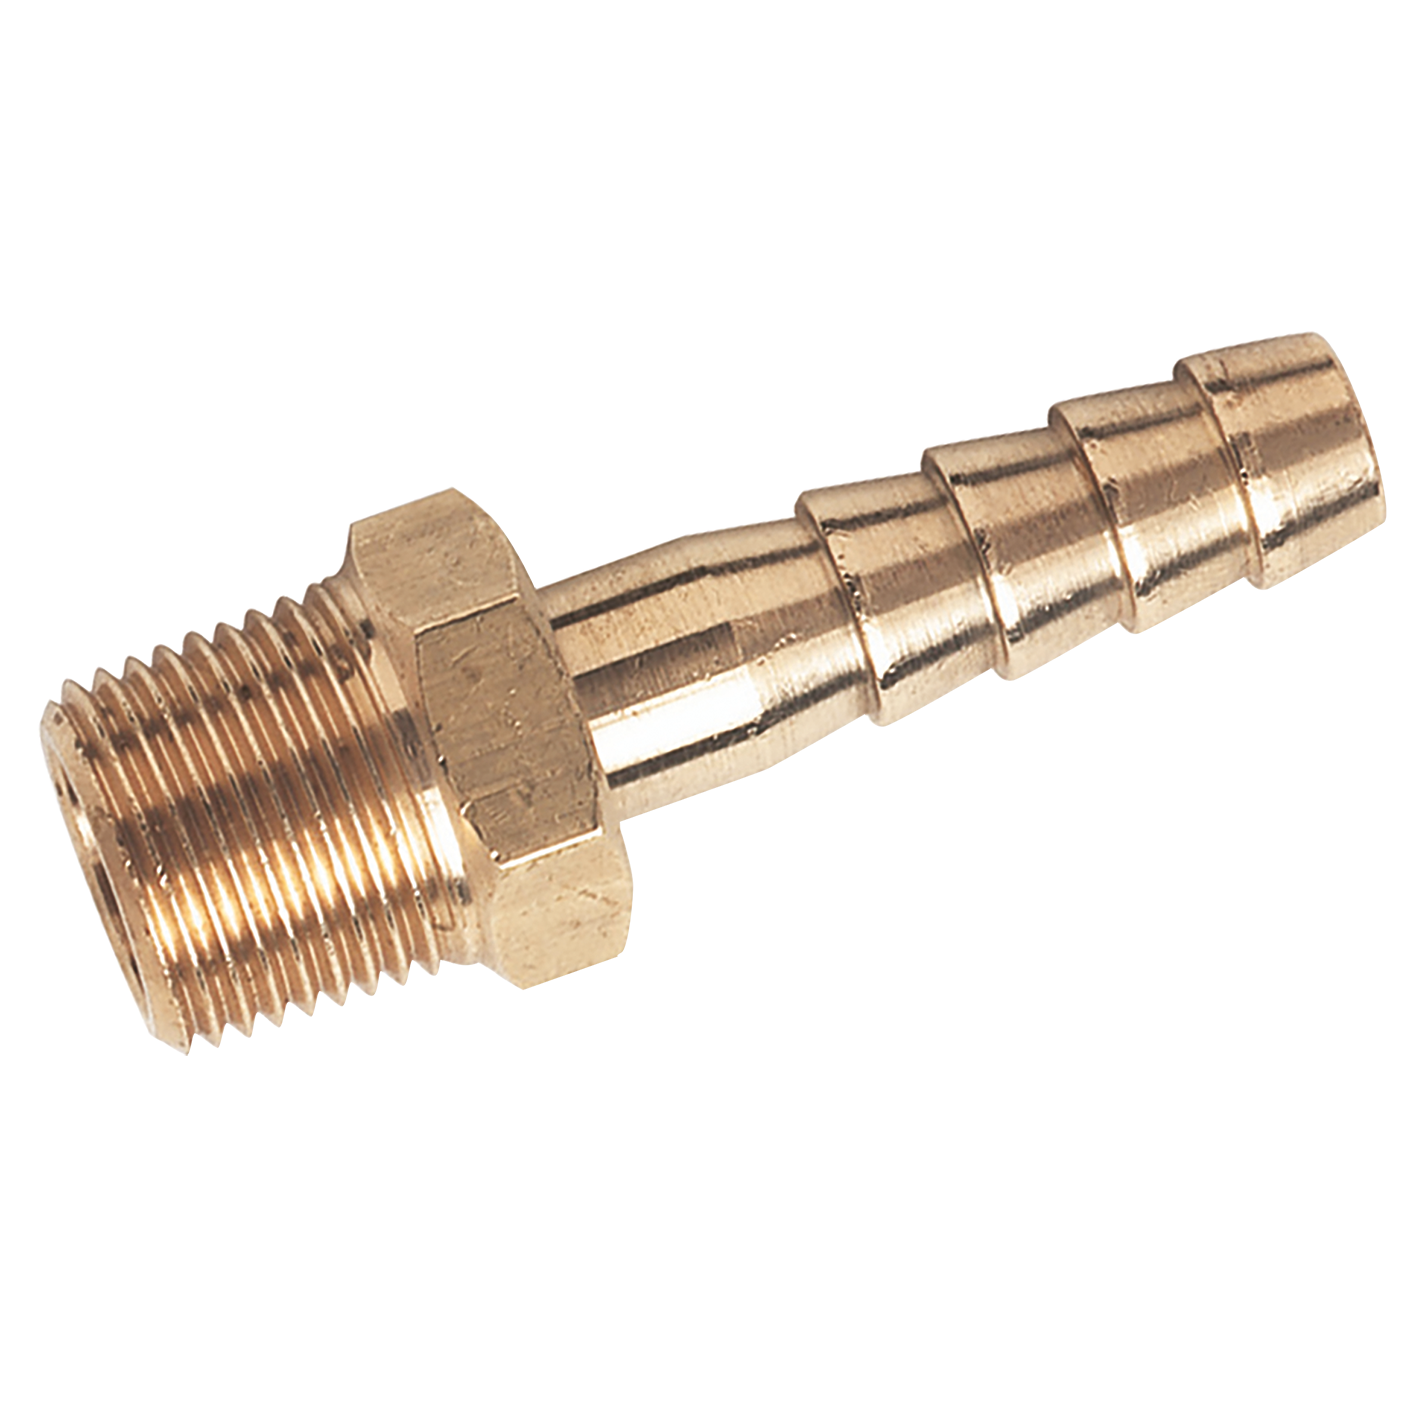 3/4" BSPT Male Straight Hose Tails, Brass